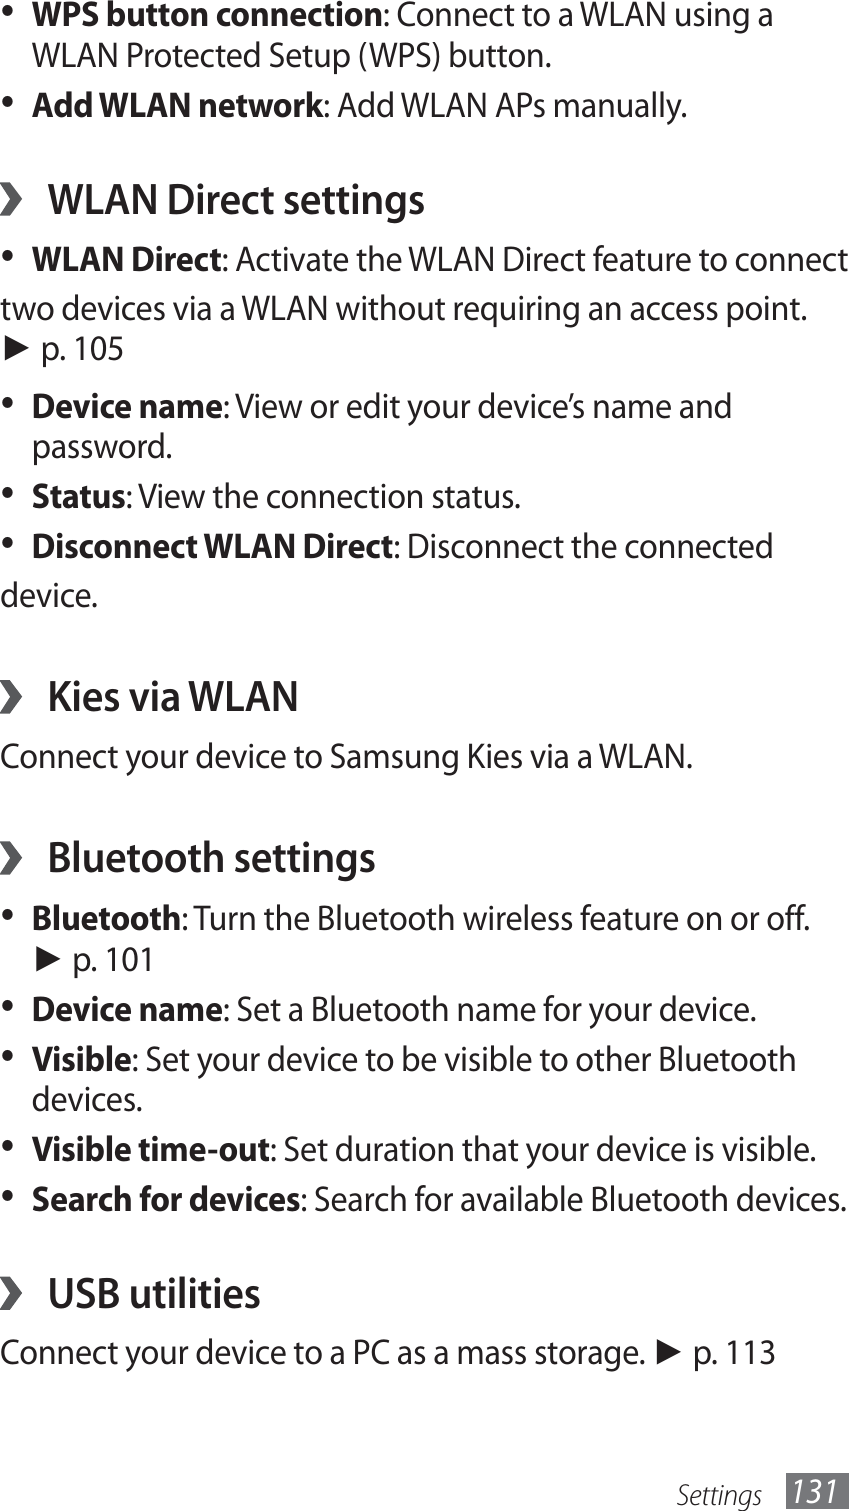 Settings 131WPS button connection•  : Connect to a WLAN using a WLAN Protected Setup (WPS) button.Add WLAN network•  : Add WLAN APs manually.WLAN Direct settings ›WLAN Direct•  : Activate the WLAN Direct feature to connecttwo devices via a WLAN without requiring an access point. ► p. 105Device name•  : View or edit your device’s name and password.Status•  : View the connection status.Disconnect WLAN Direct•  : Disconnect the connecteddevice.Kies via WLAN ›Connect your device to Samsung Kies via a WLAN.Bluetooth settings ›Bluetooth•  : Turn the Bluetooth wireless feature on or off. ► p. 101Device name•  : Set a Bluetooth name for your device.Visible•  : Set your device to be visible to other Bluetooth devices.Visible time-out•  : Set duration that your device is visible.Search for devices•  : Search for available Bluetooth devices.USB utilities ›Connect your device to a PC as a mass storage. ► p. 113